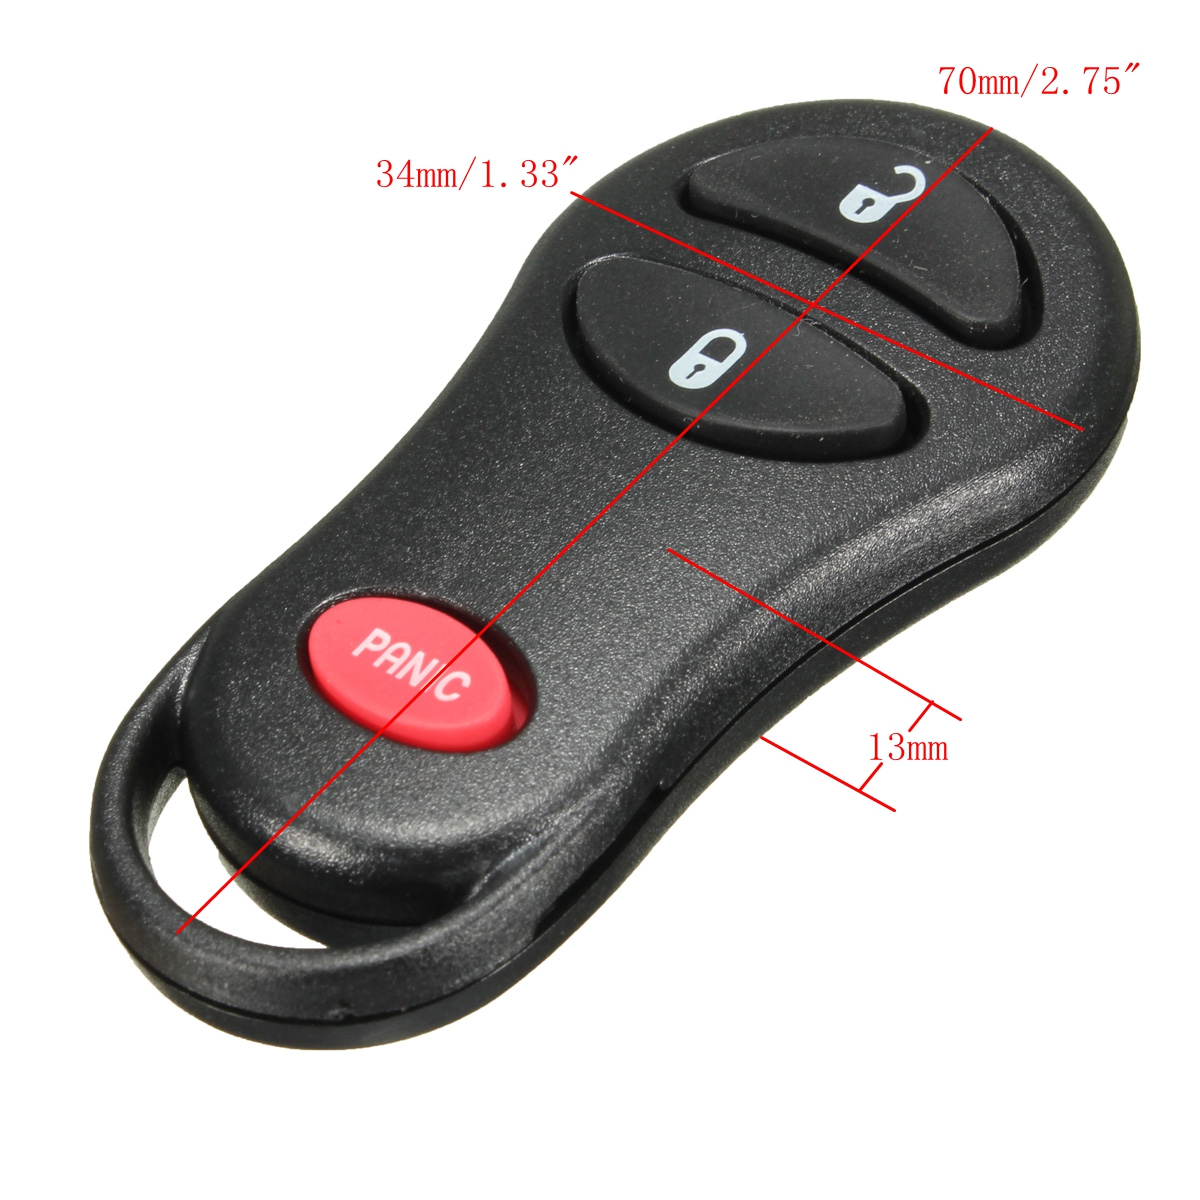 Jeep replacement remote keyless entry #3